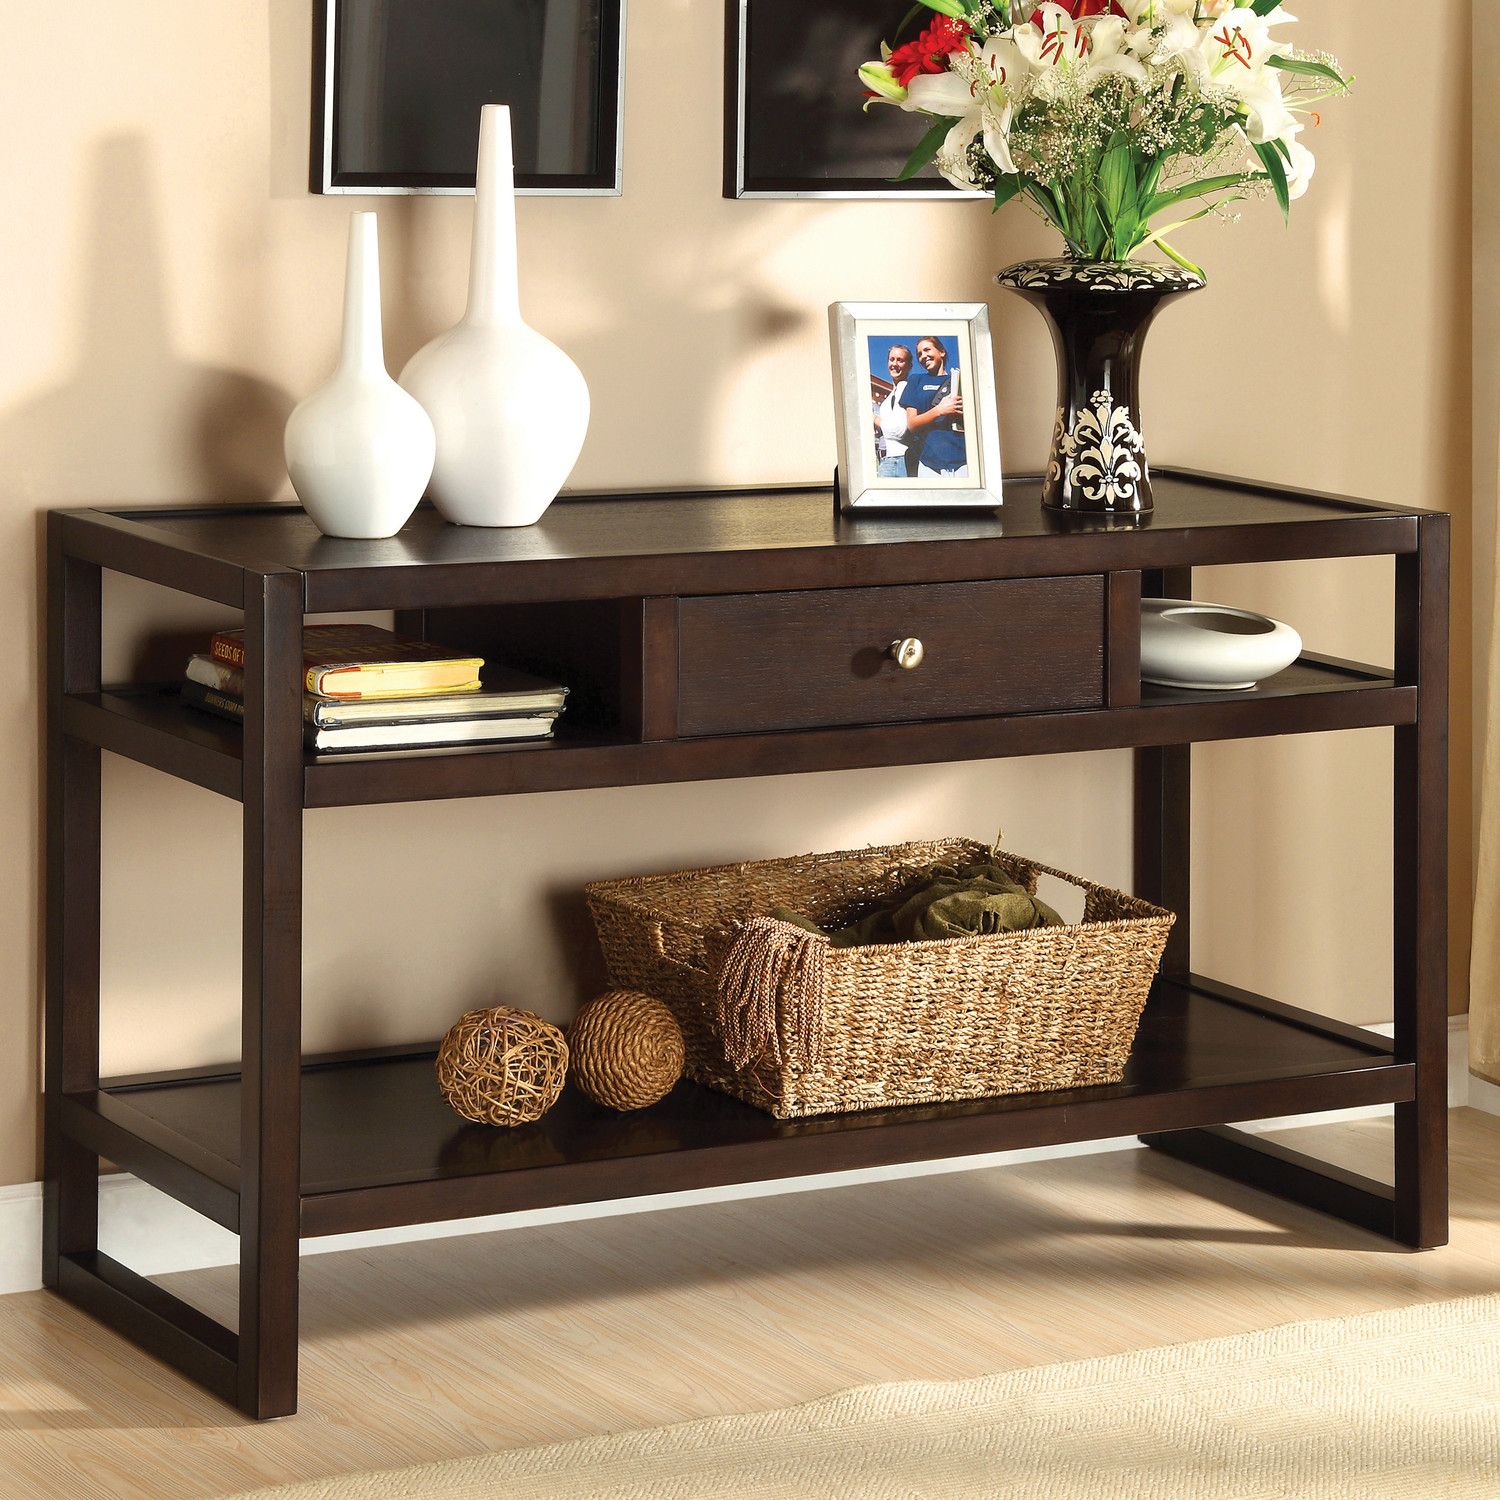 Between Wood And Glass Long Console Tables – Homesfeed Within Black Wood Storage Console Tables (View 3 of 20)